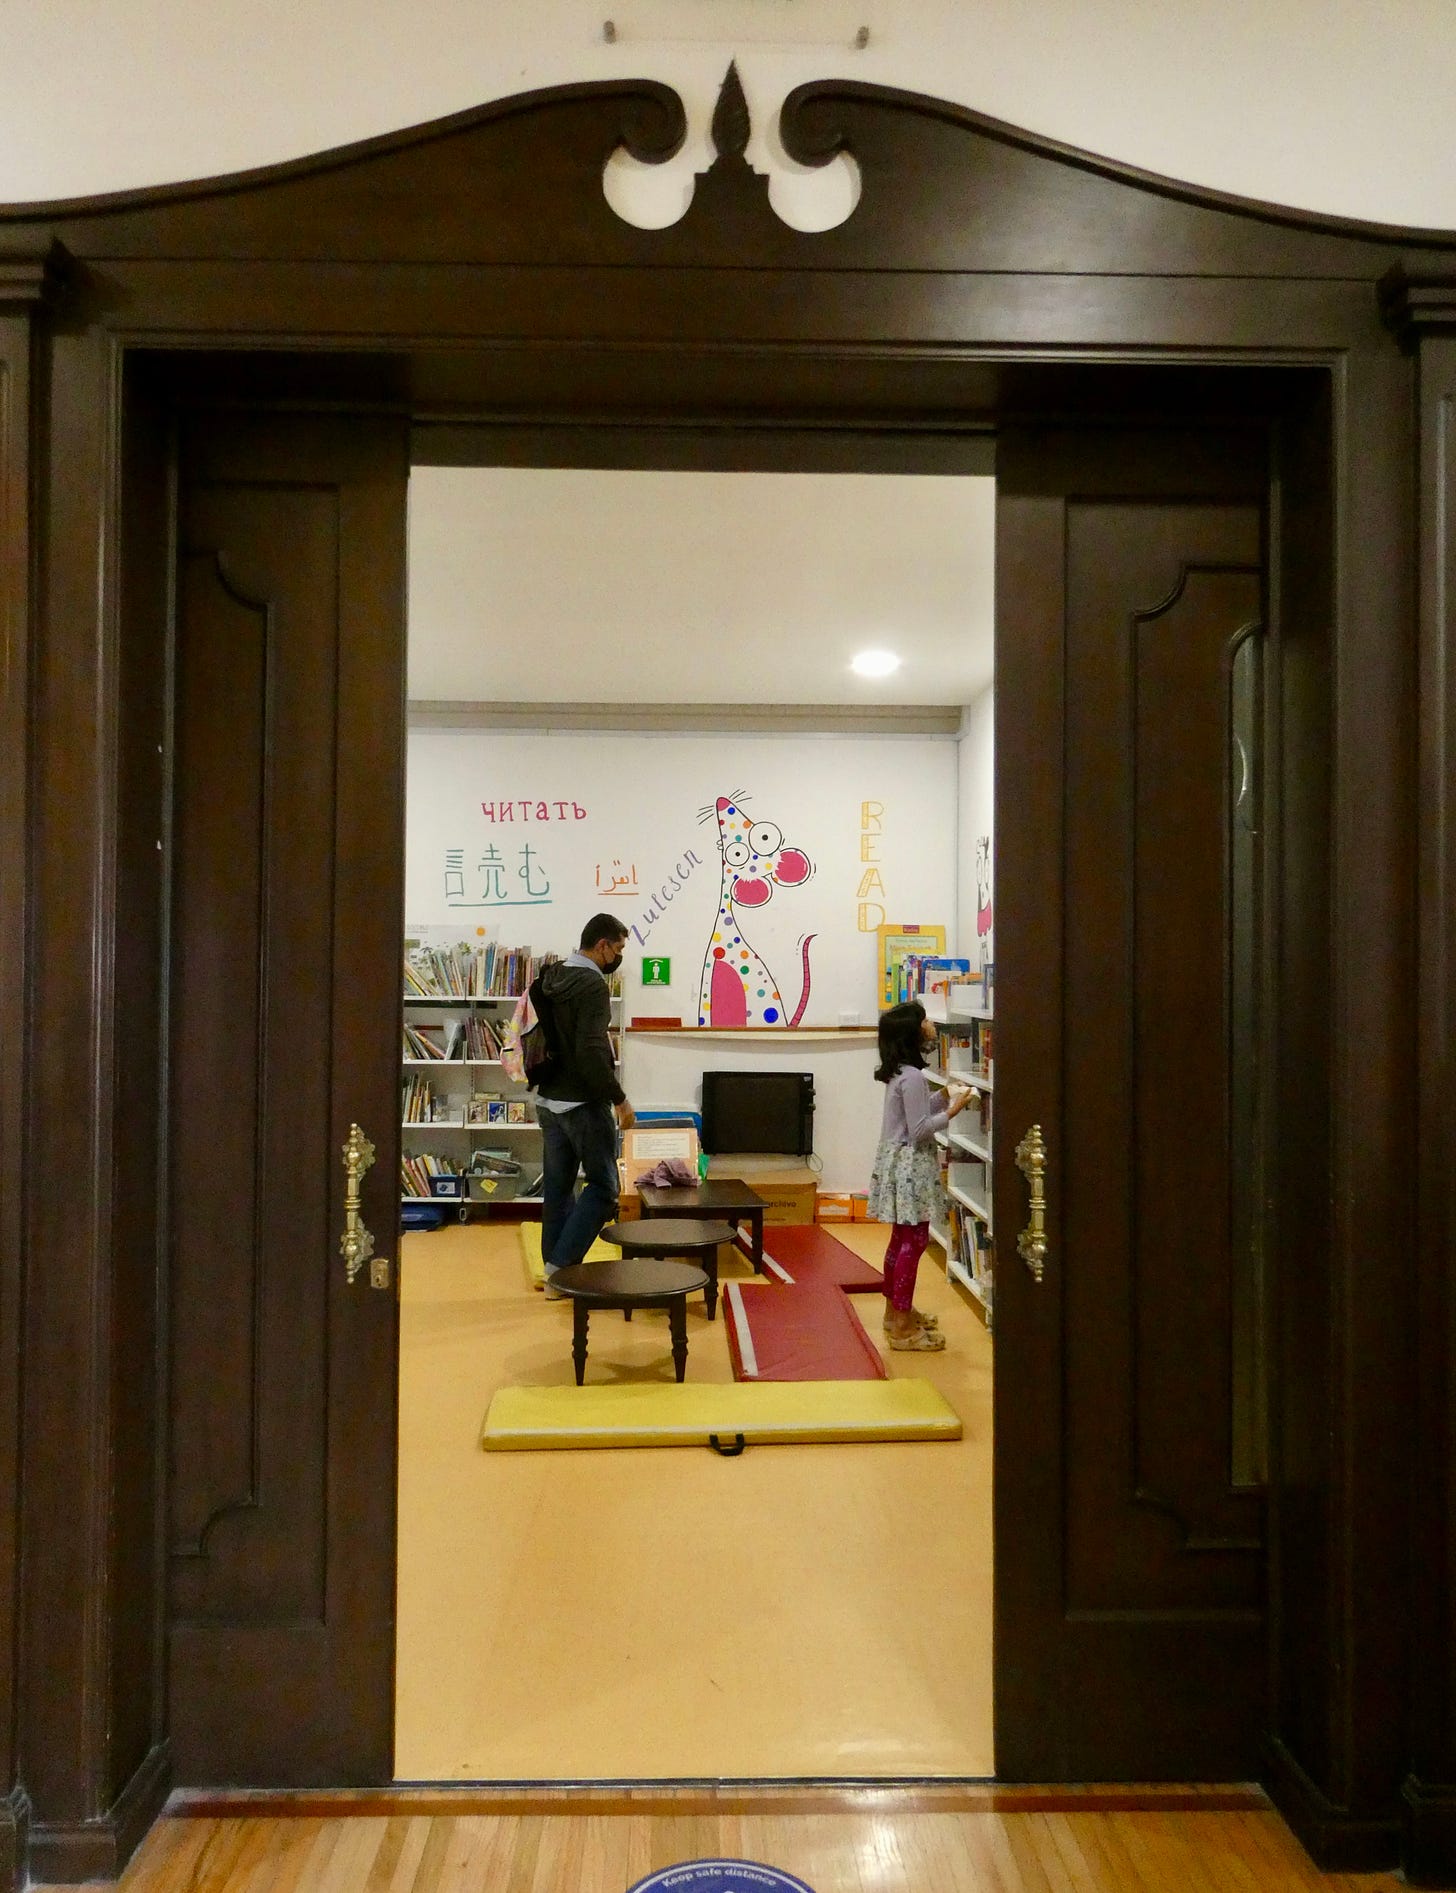 double doors open to show library inside